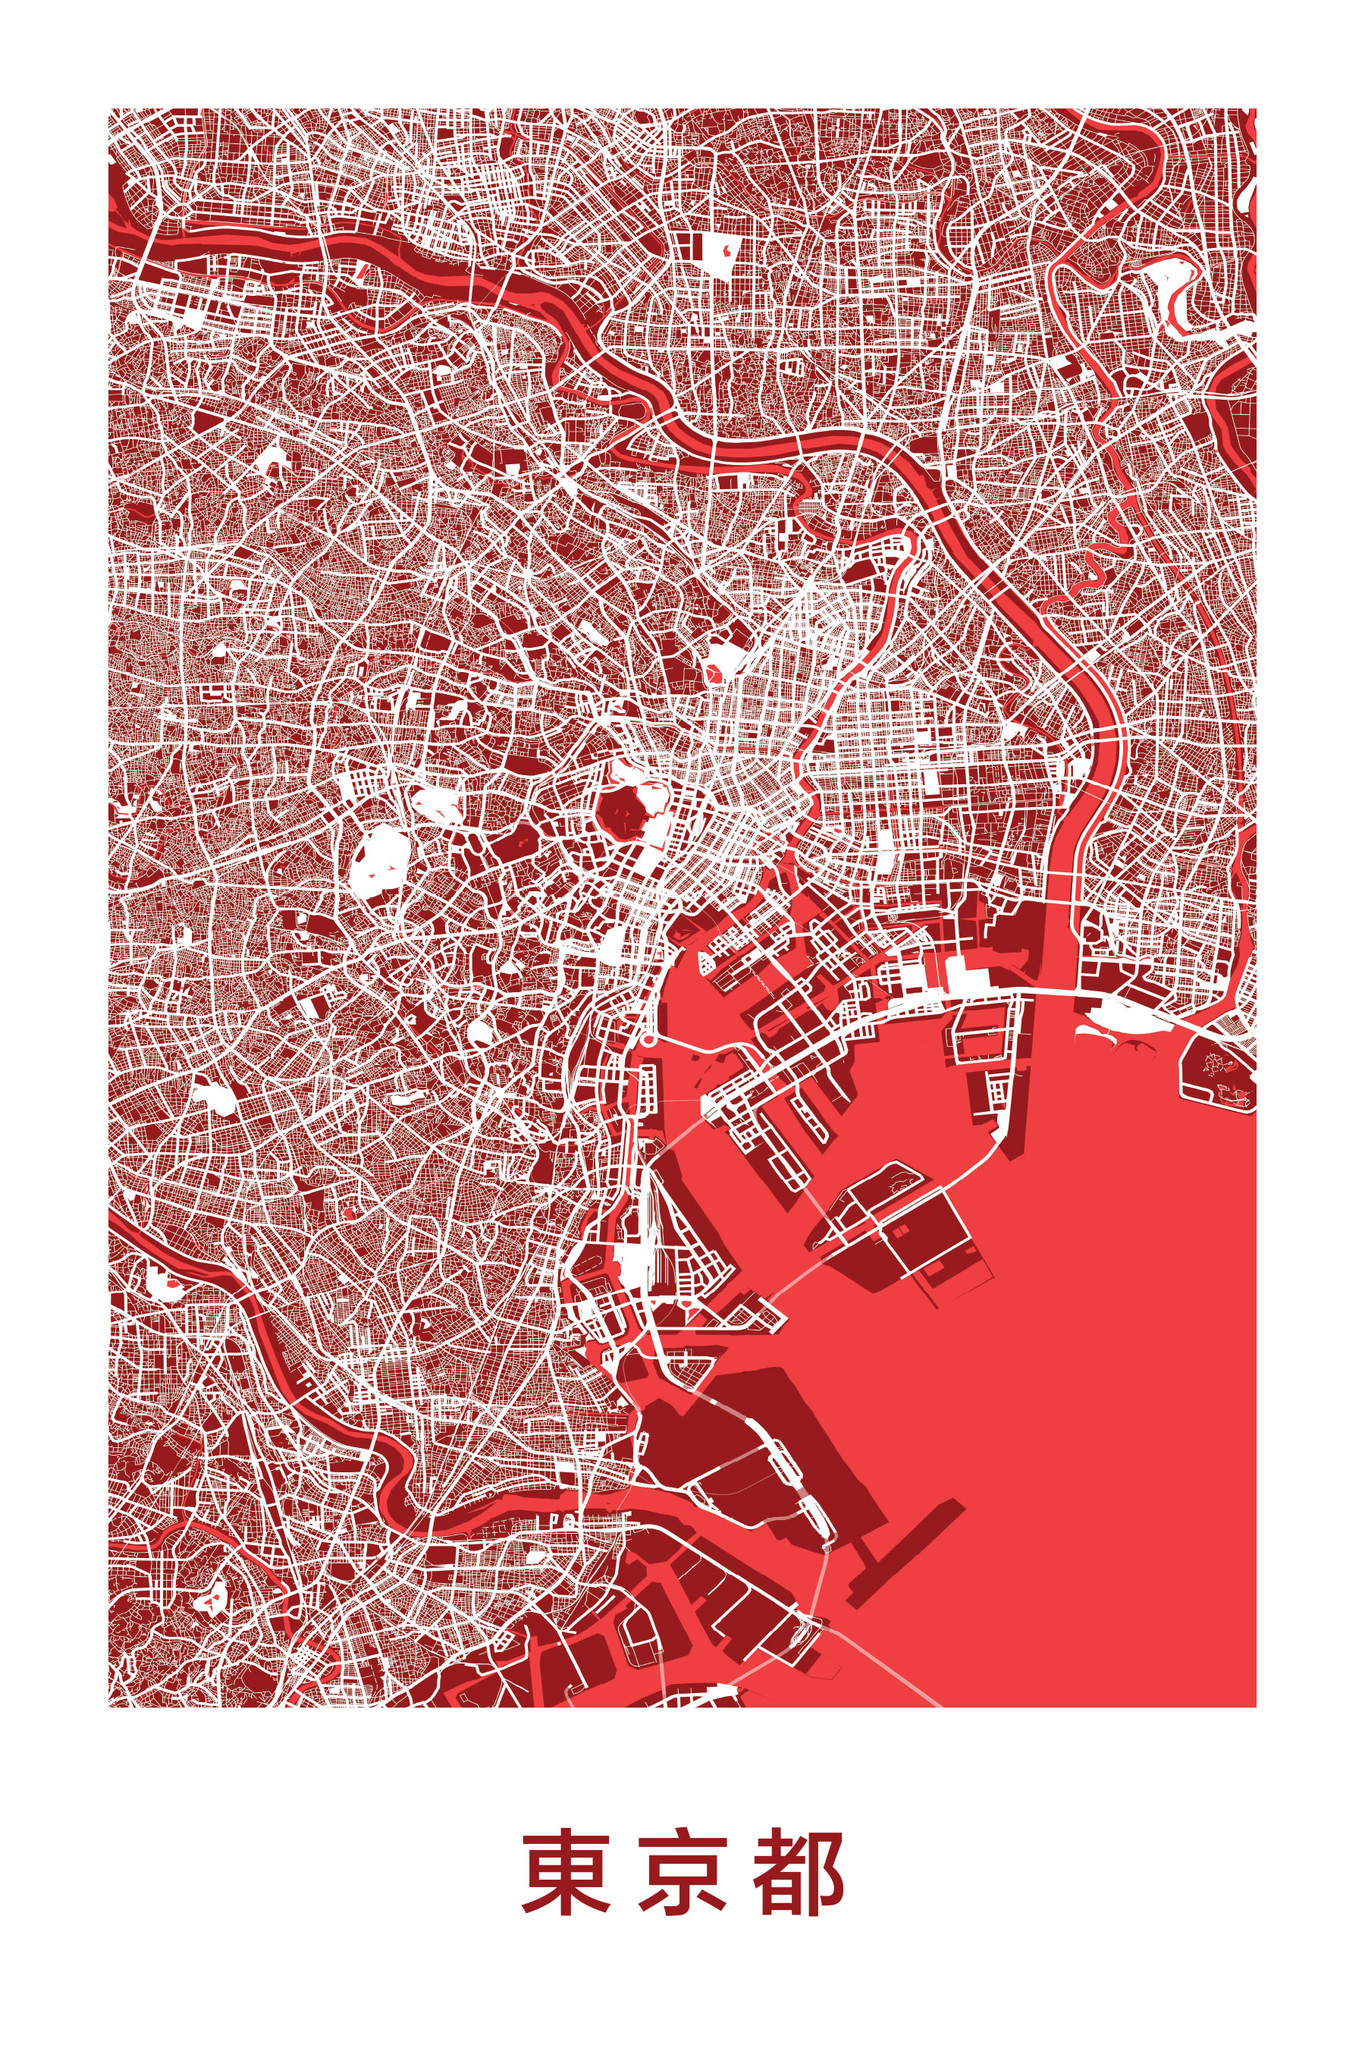 14 Maps That Reveal The Hidden Beauty Of Big Cities